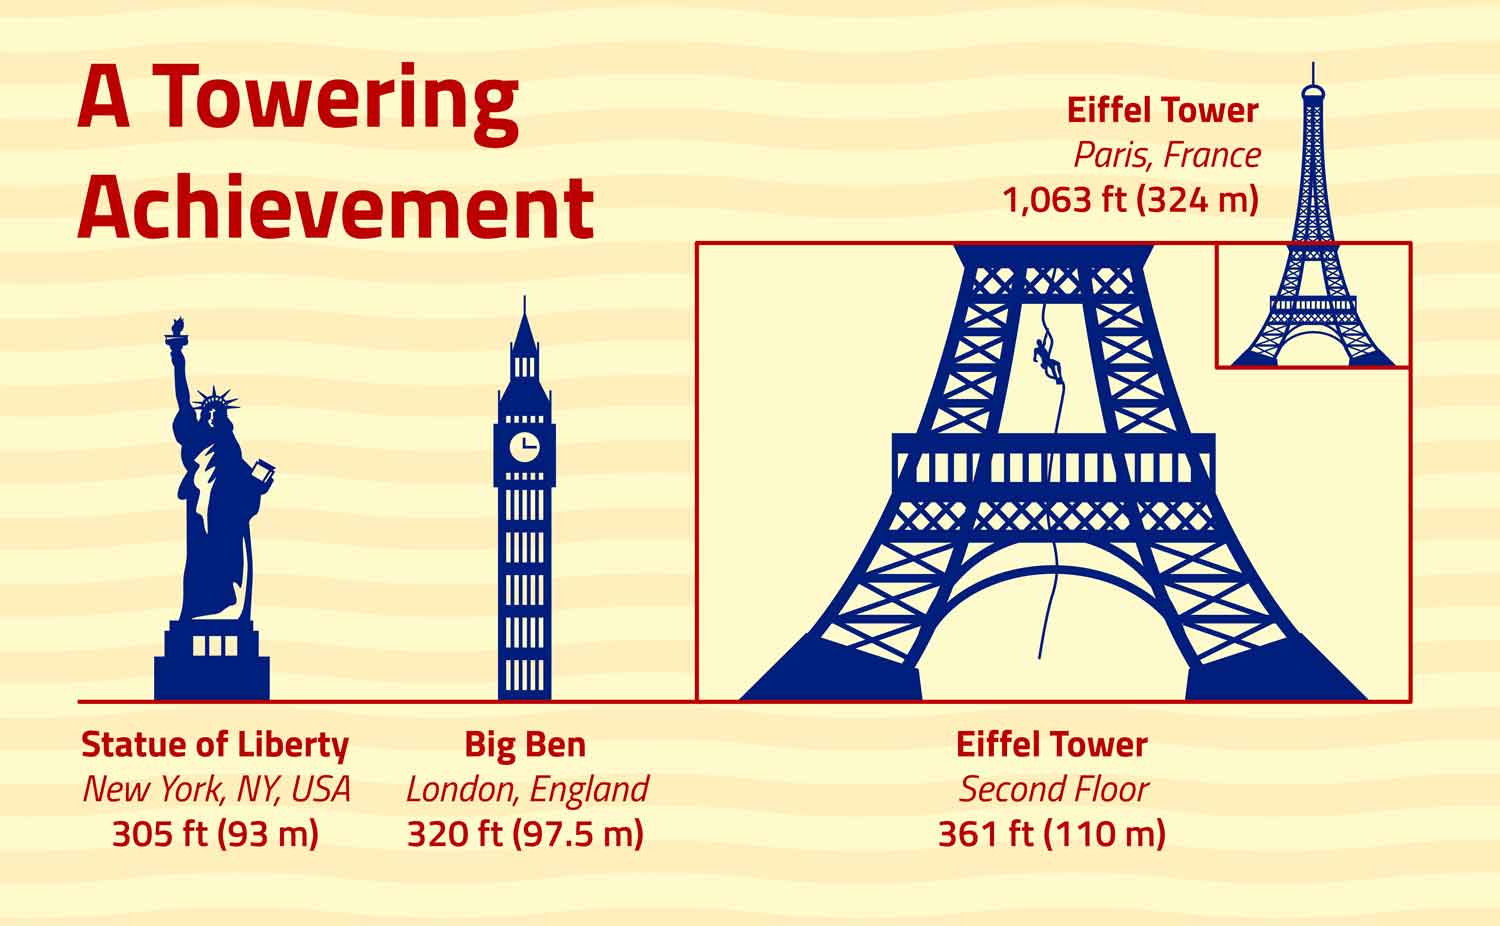 A comparison of the heights of the Statue of Liberty, Big Ben, and the Eiffel Tower with illustrations.